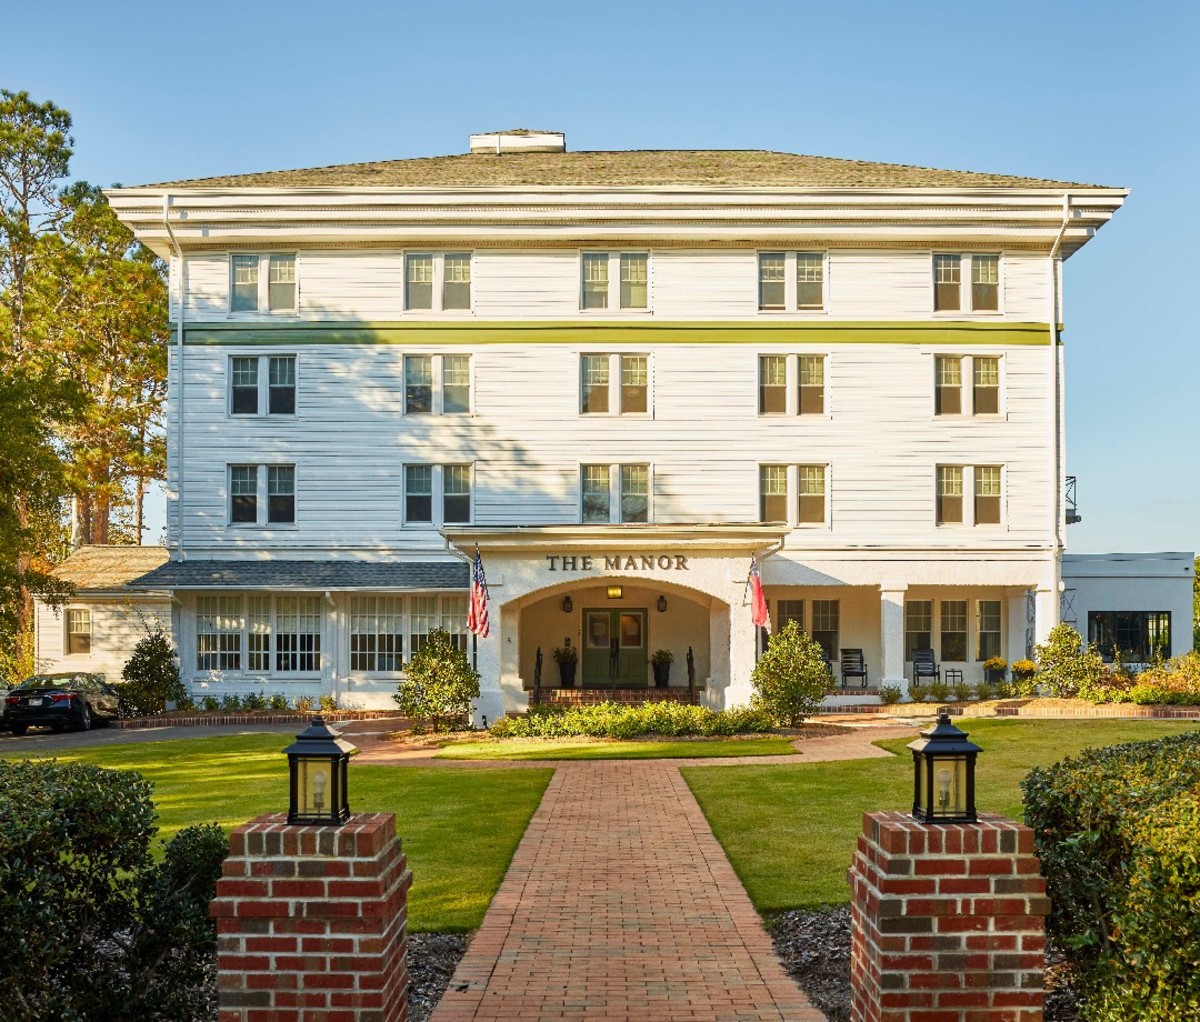 Front exterior image of The Manor, Pinehurst's oldest hotel